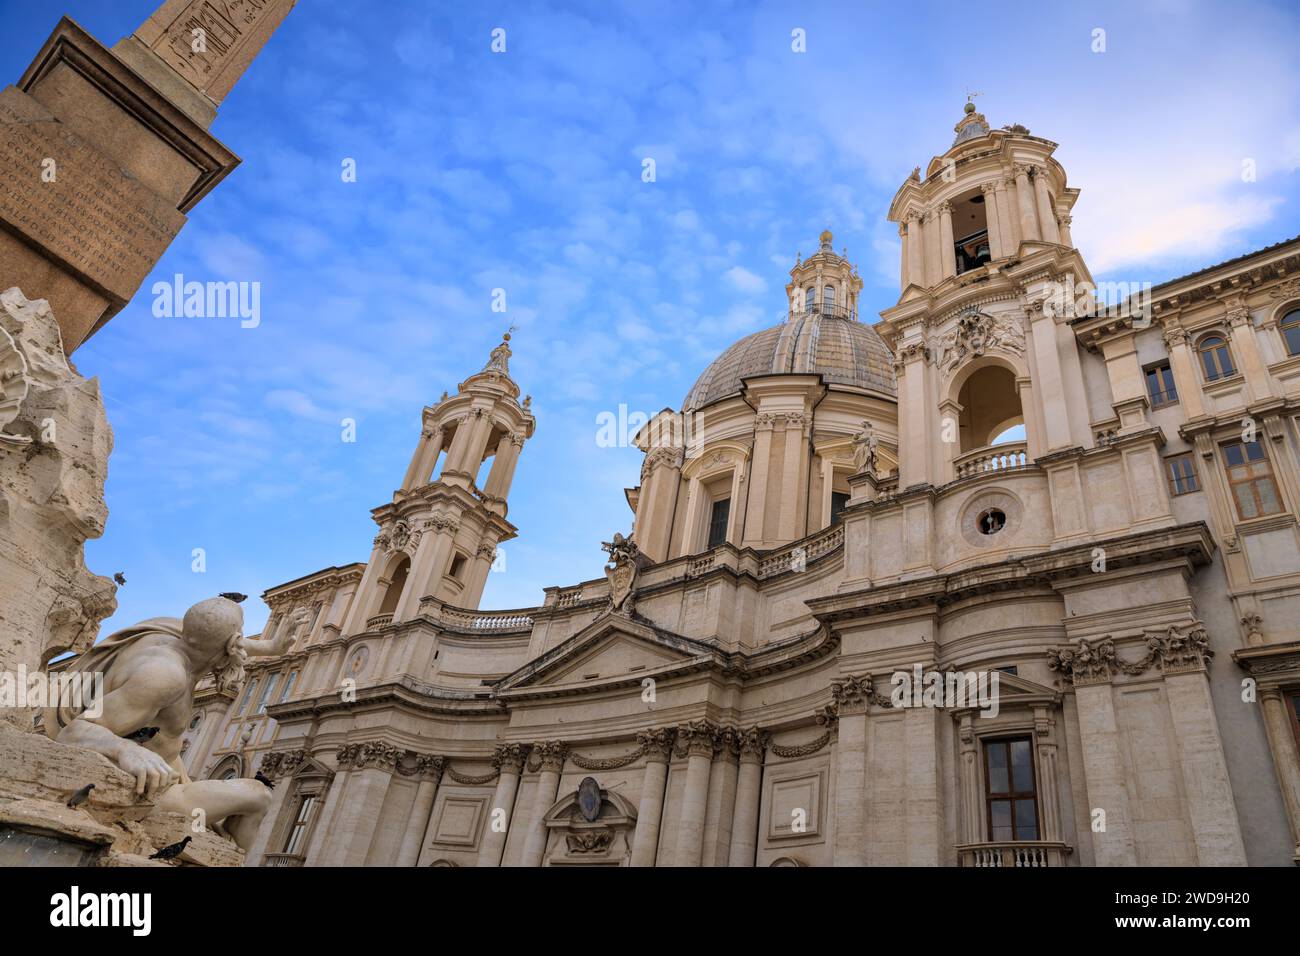 Facade of Sant'Agnese in Agone,  Baroque church in Navona Square at Rome, Italy. Stock Photo